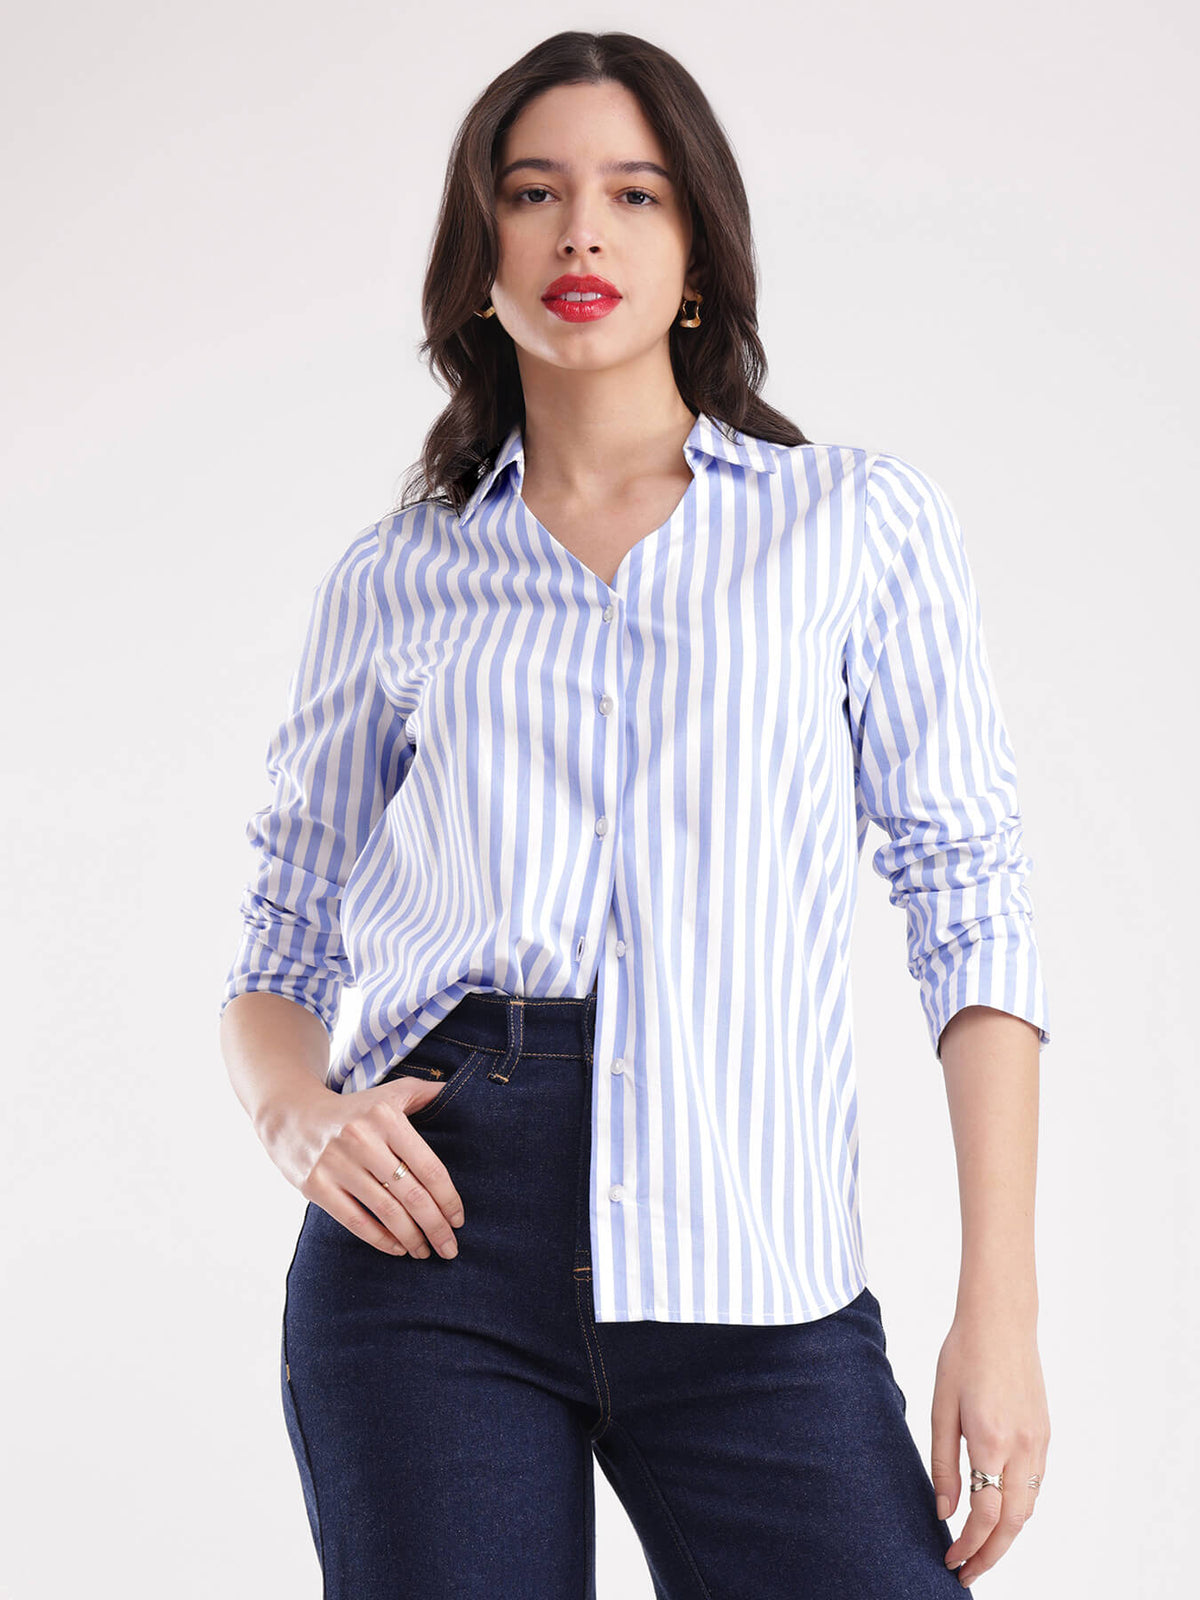 Cotton Vertical Stripes Shirt - Blue And White